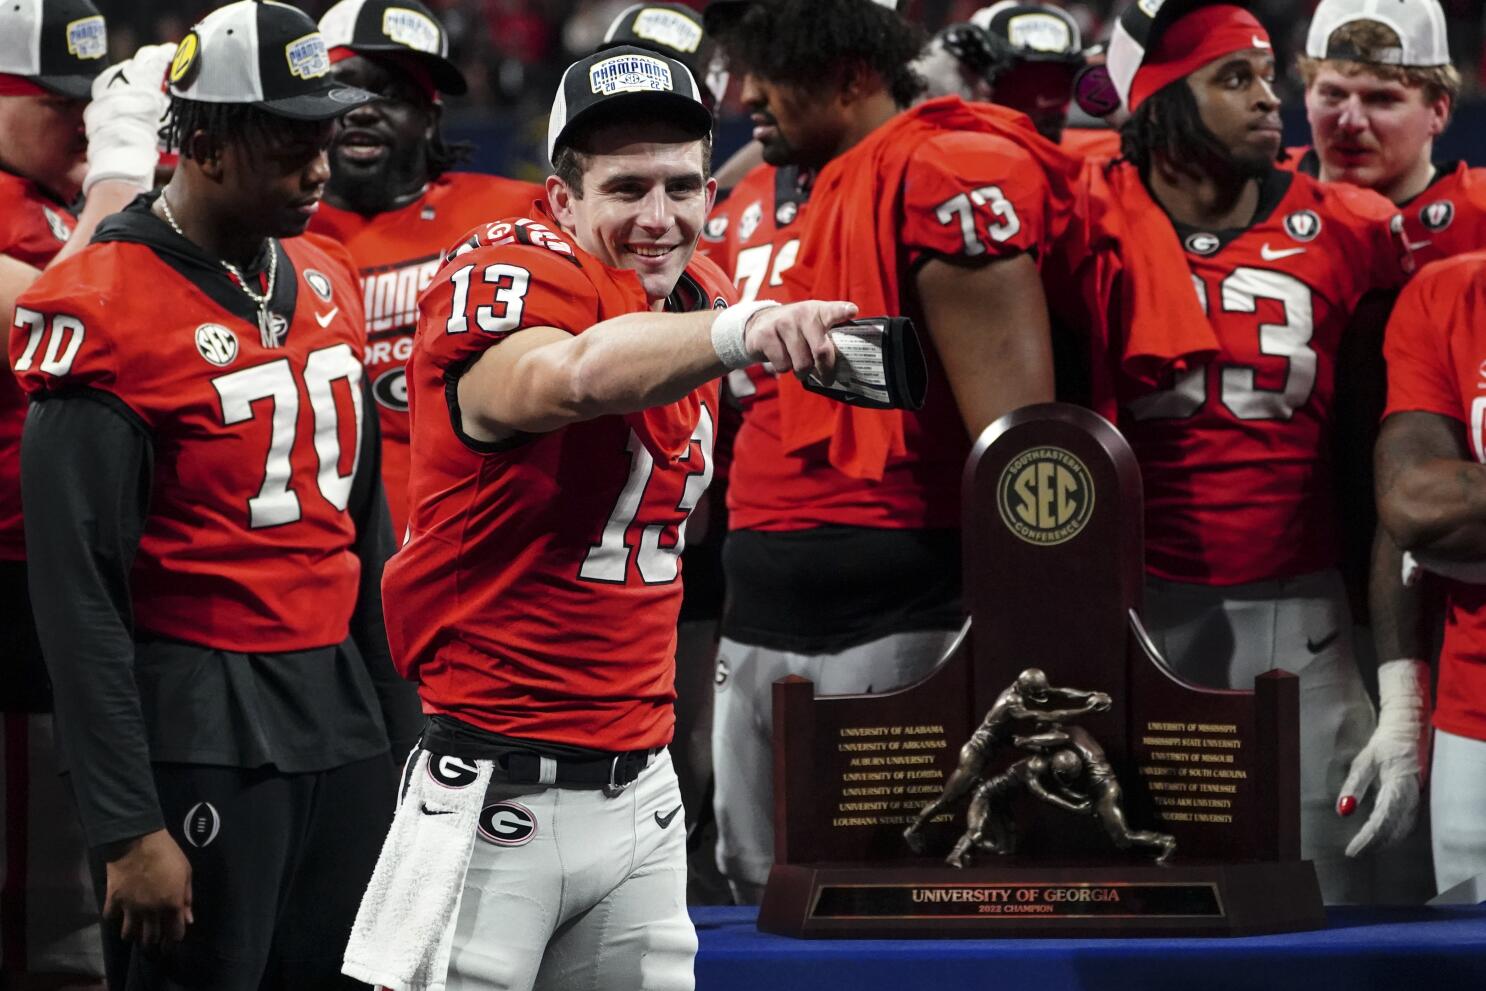 The drought is over: Georgia is national champion again